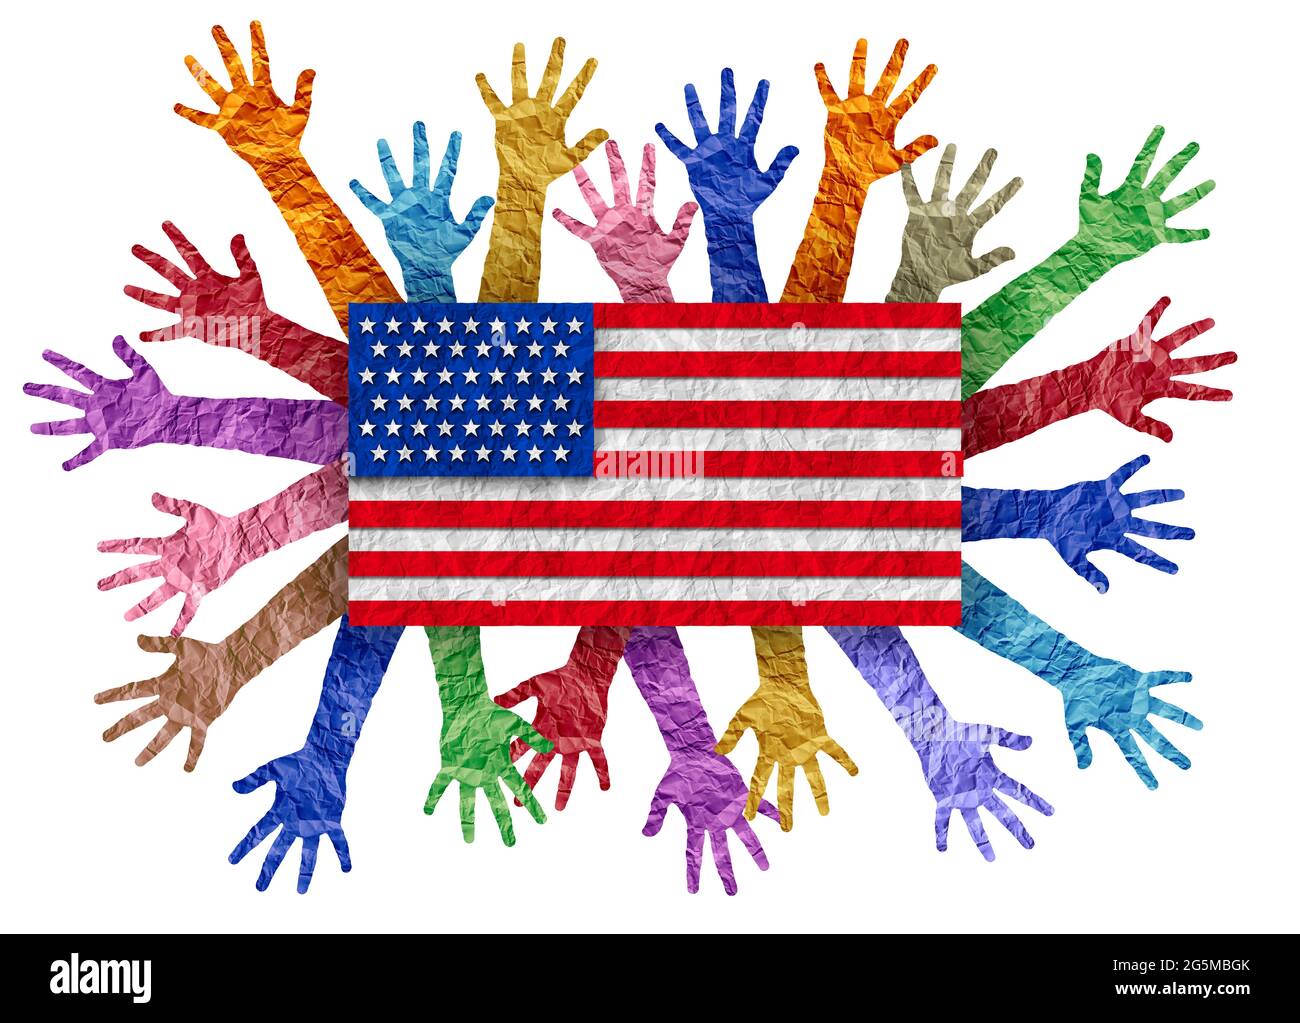 USA Independence day with diverse people waiving hands as a diverse American celebration of US national holiday on the fourth of july. Stock Photo